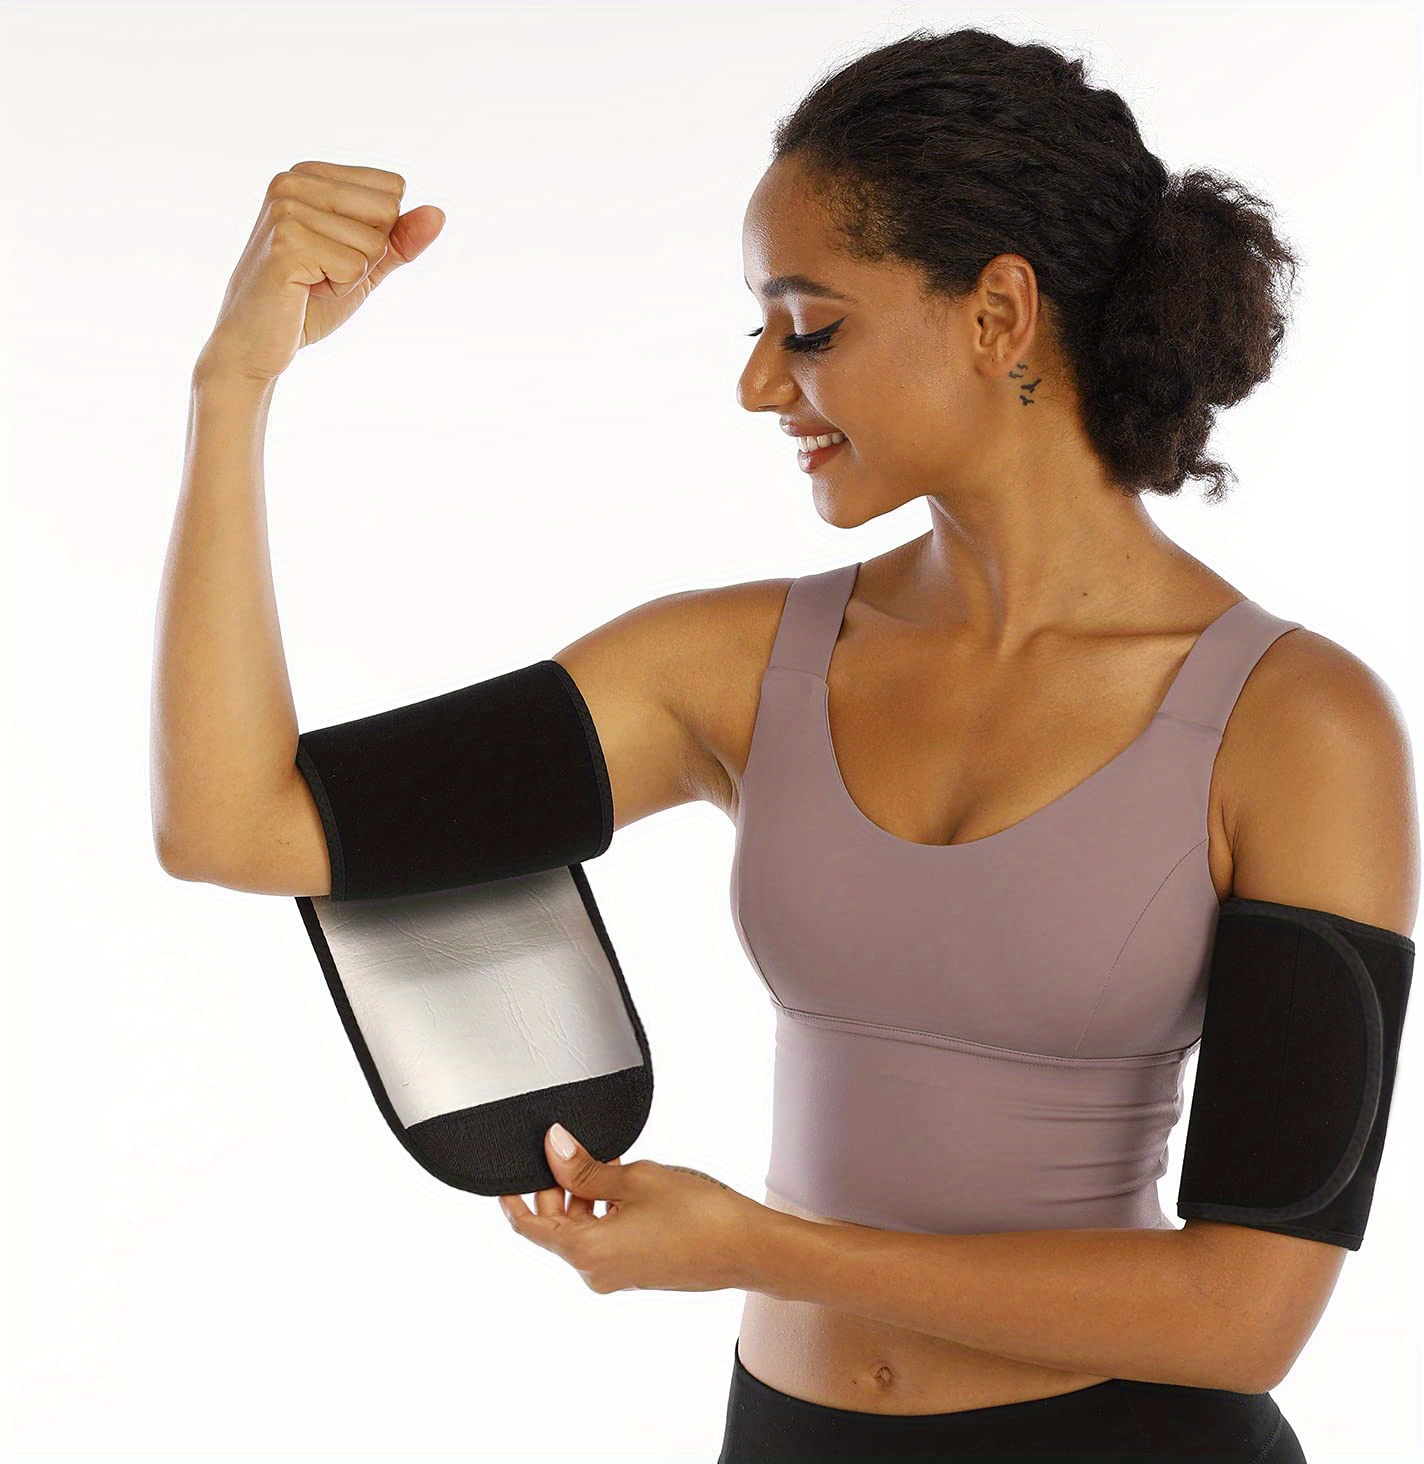 Elbow & Knee Pads Sweat Arm Trimmers For Women Lose Fat